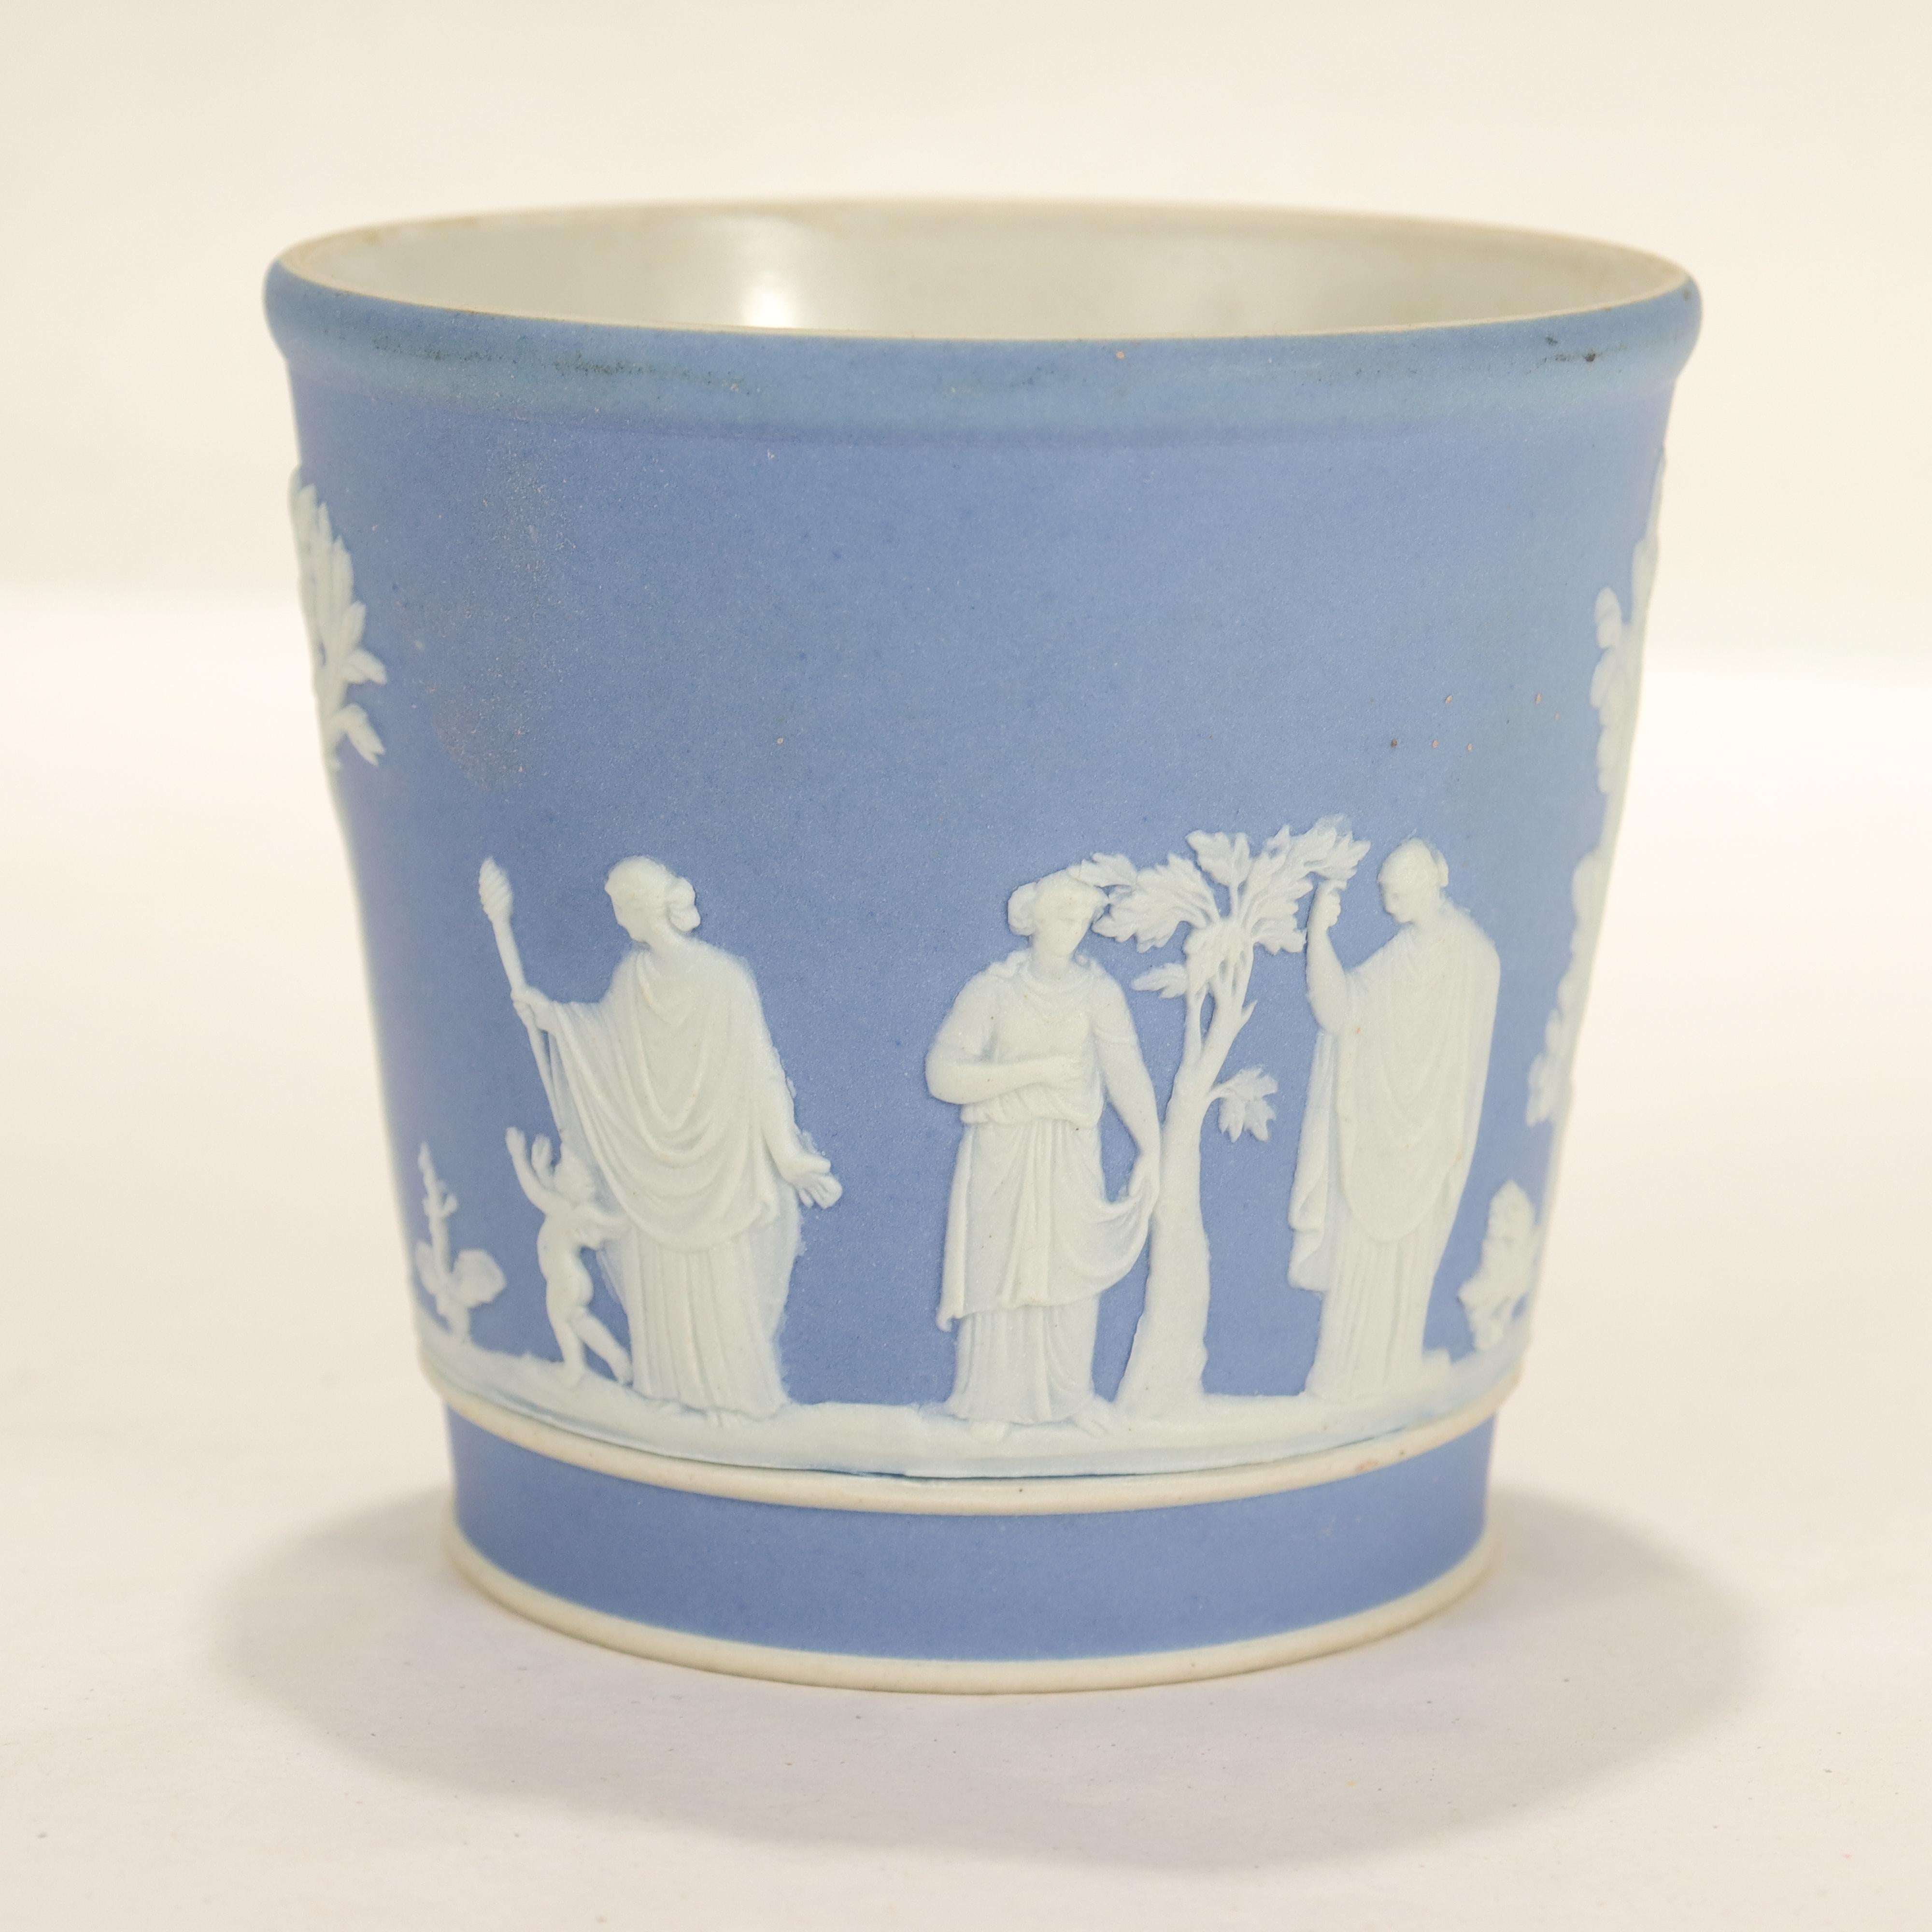 A fine antique Jasperware beaker or cup.

In Wedgwood blue with white relief decoration depicting men, women, children, and trees in a Classical style.

We assume this was used as a tumbler or drinking vessel.

Simply a wonderful Jasperware